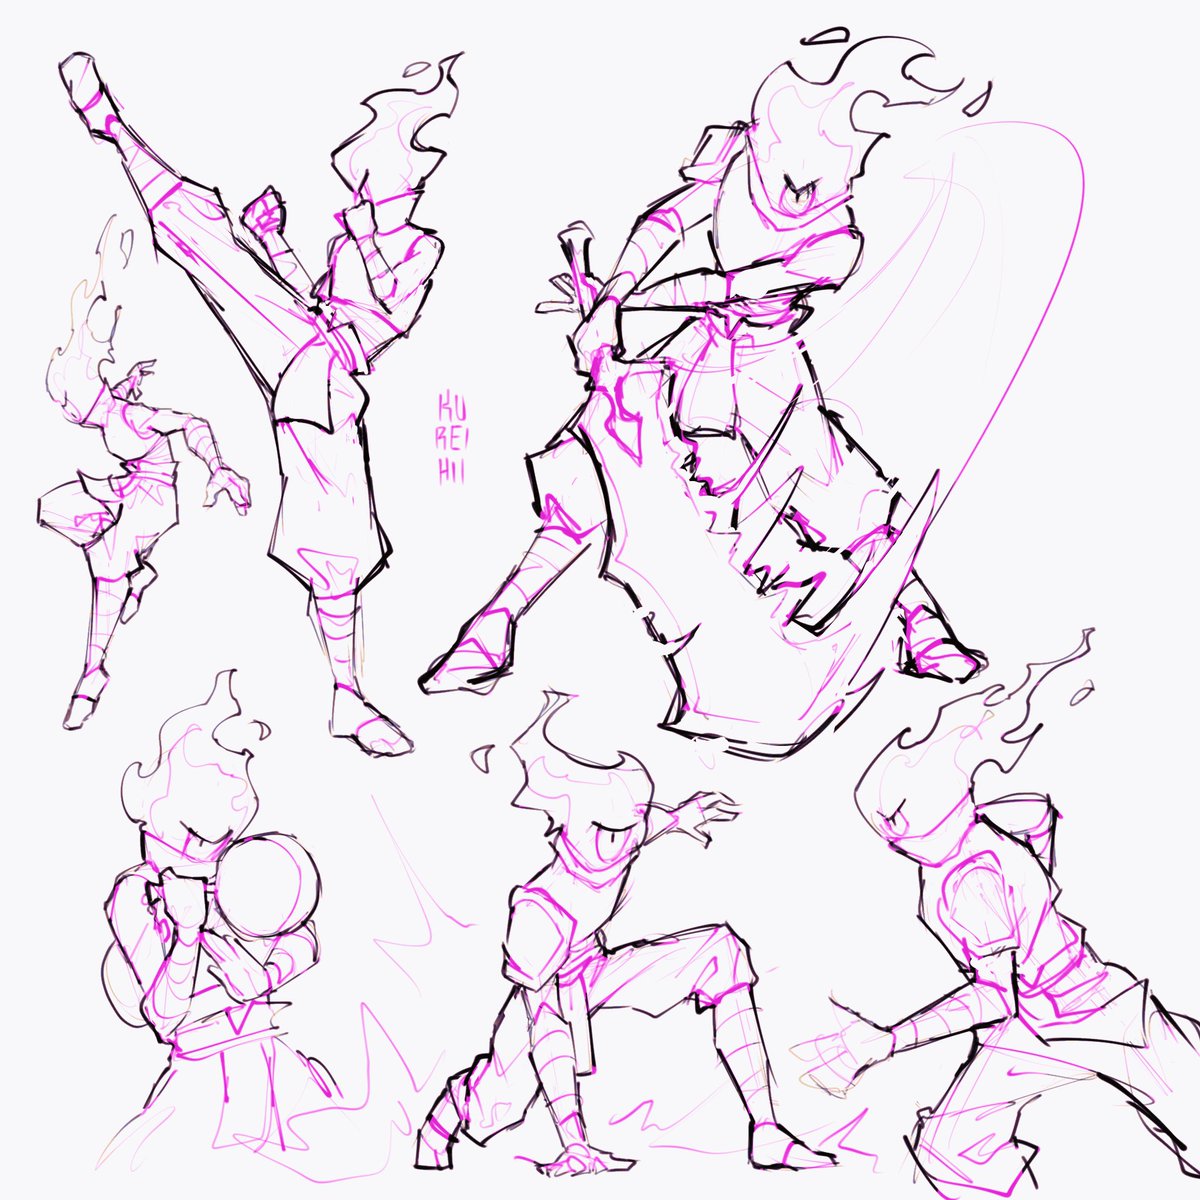 5 Sword Poses to Use as a Reference for Drawing - SetPose.com